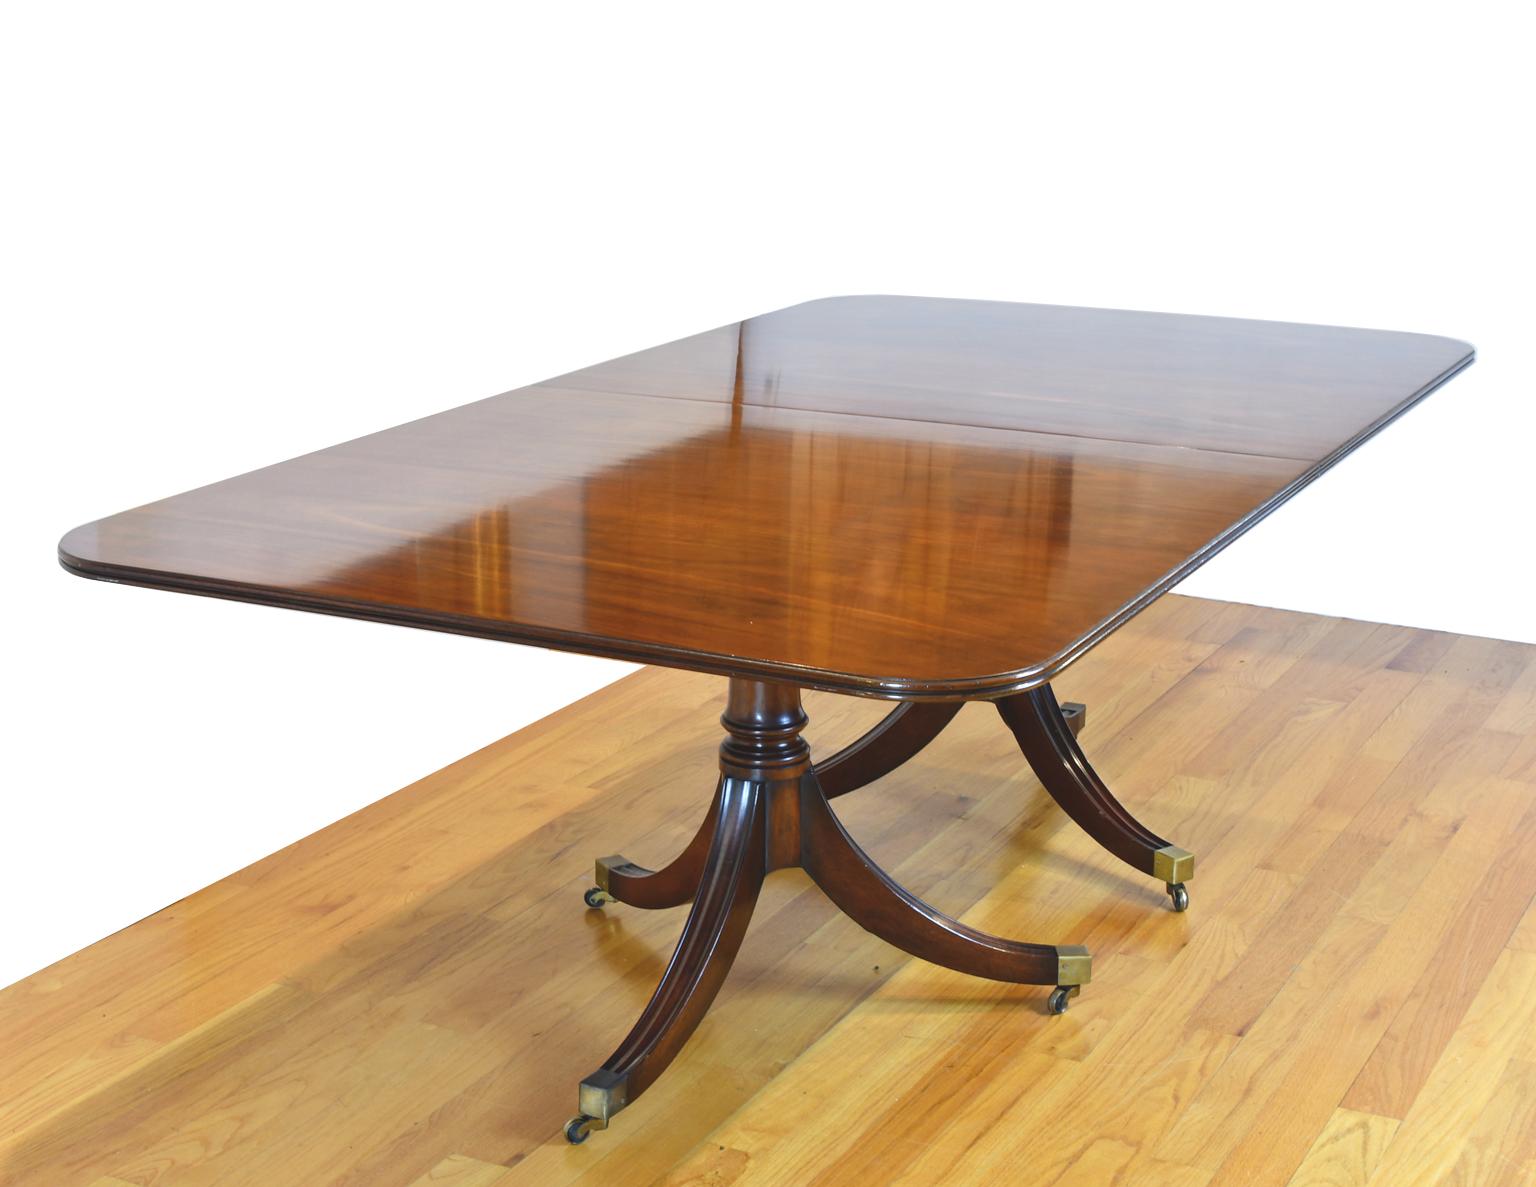 15' Antique English Banquet Dining Table in Mahogany with 3 Pedestals & 2 Leaves 2